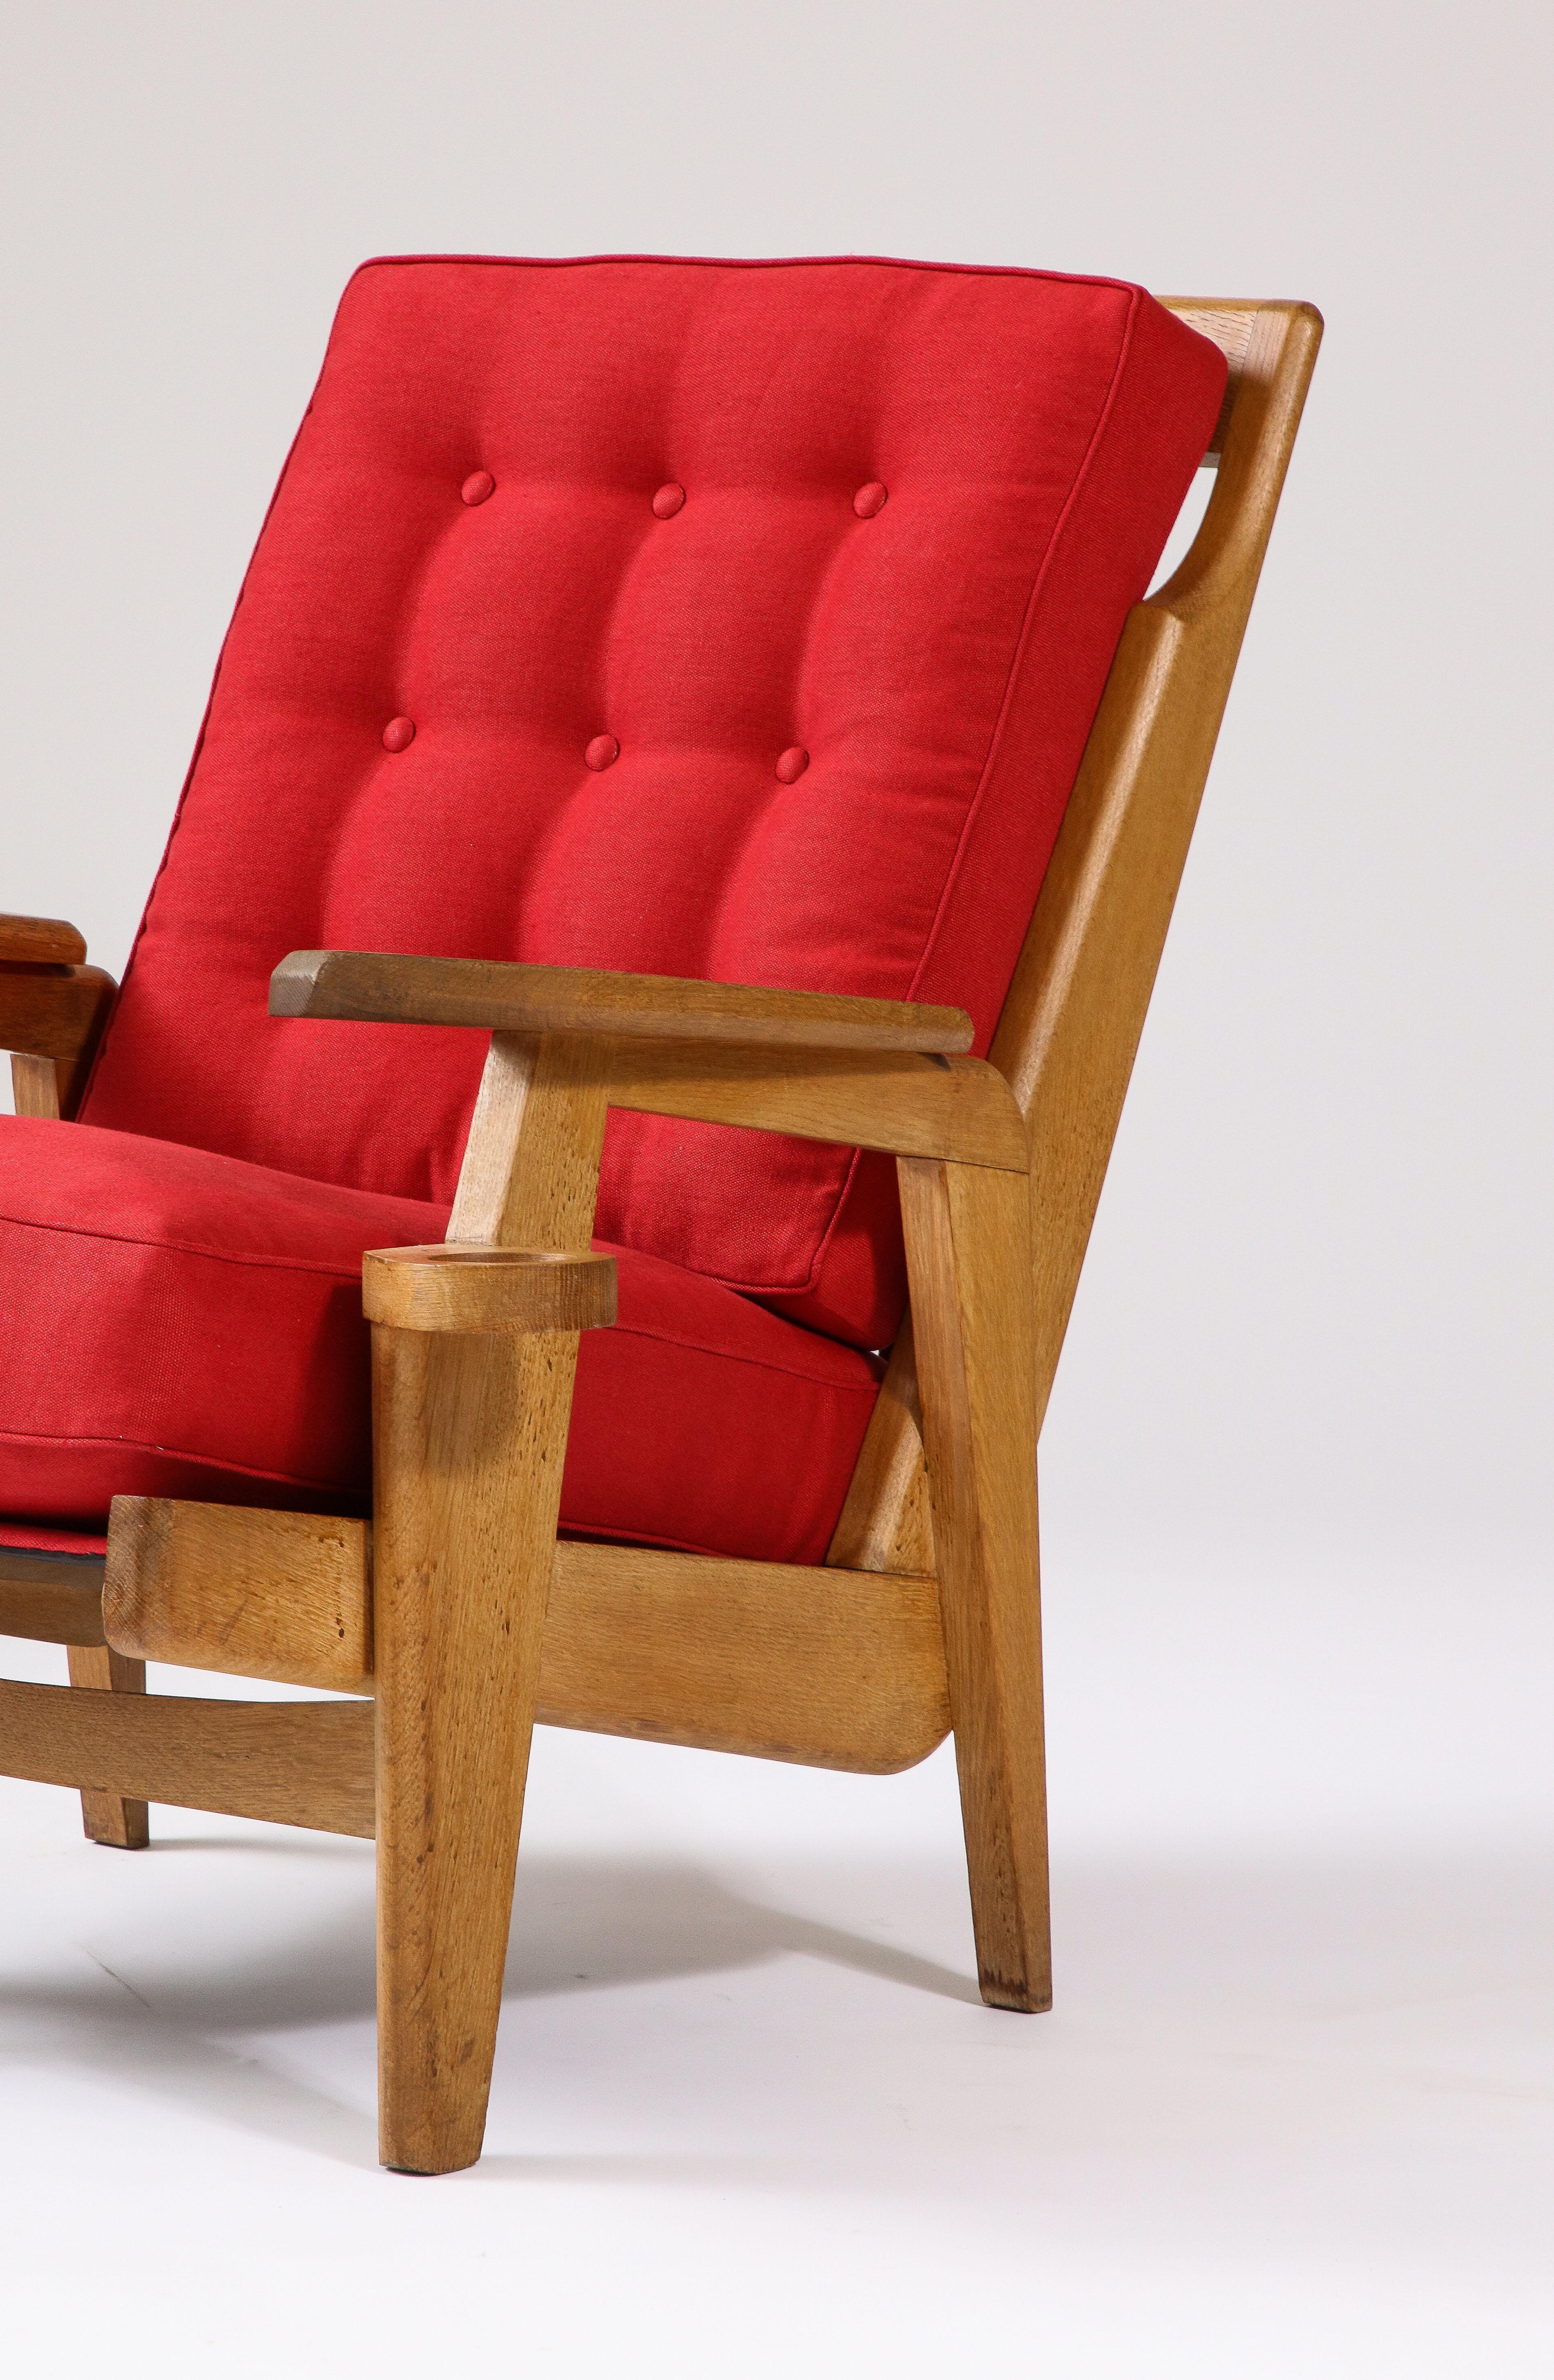 Linen Oak and Upholstery Armchair by Guillerme et Chambron, France, c. 1960